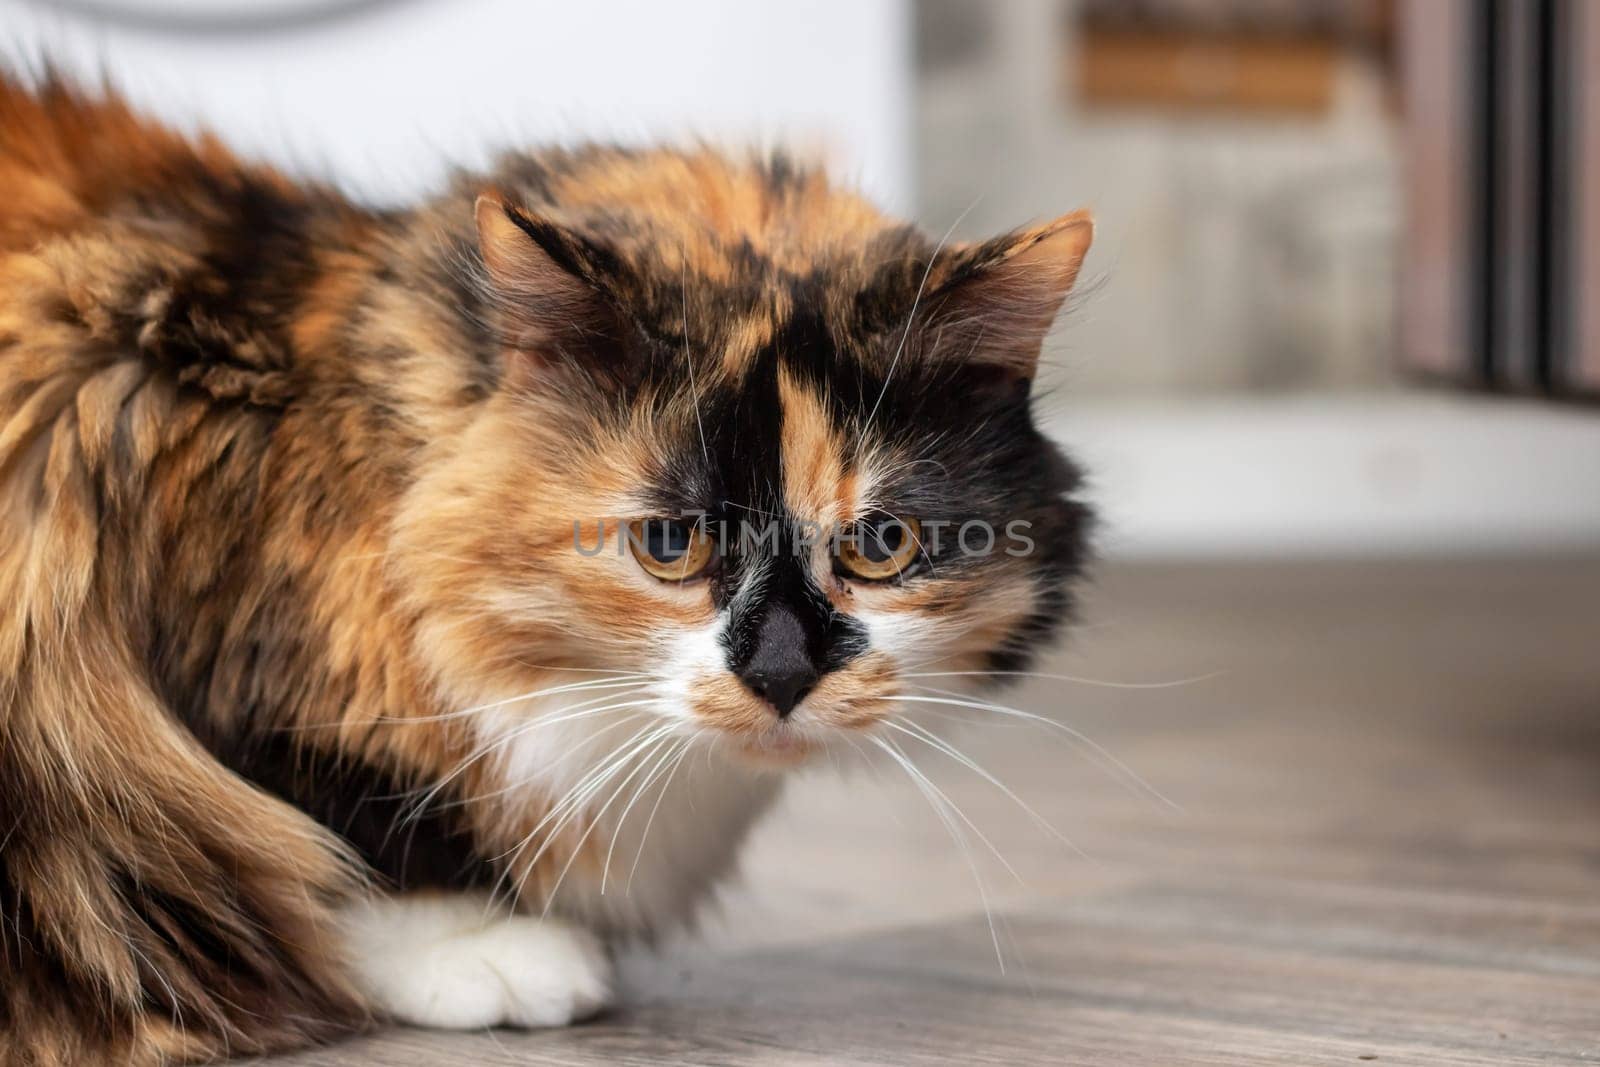 A Felidae carnivore, the mediumsized calico cat with whiskers sits on a wooden floor, gazing up by the window in a graceful pose